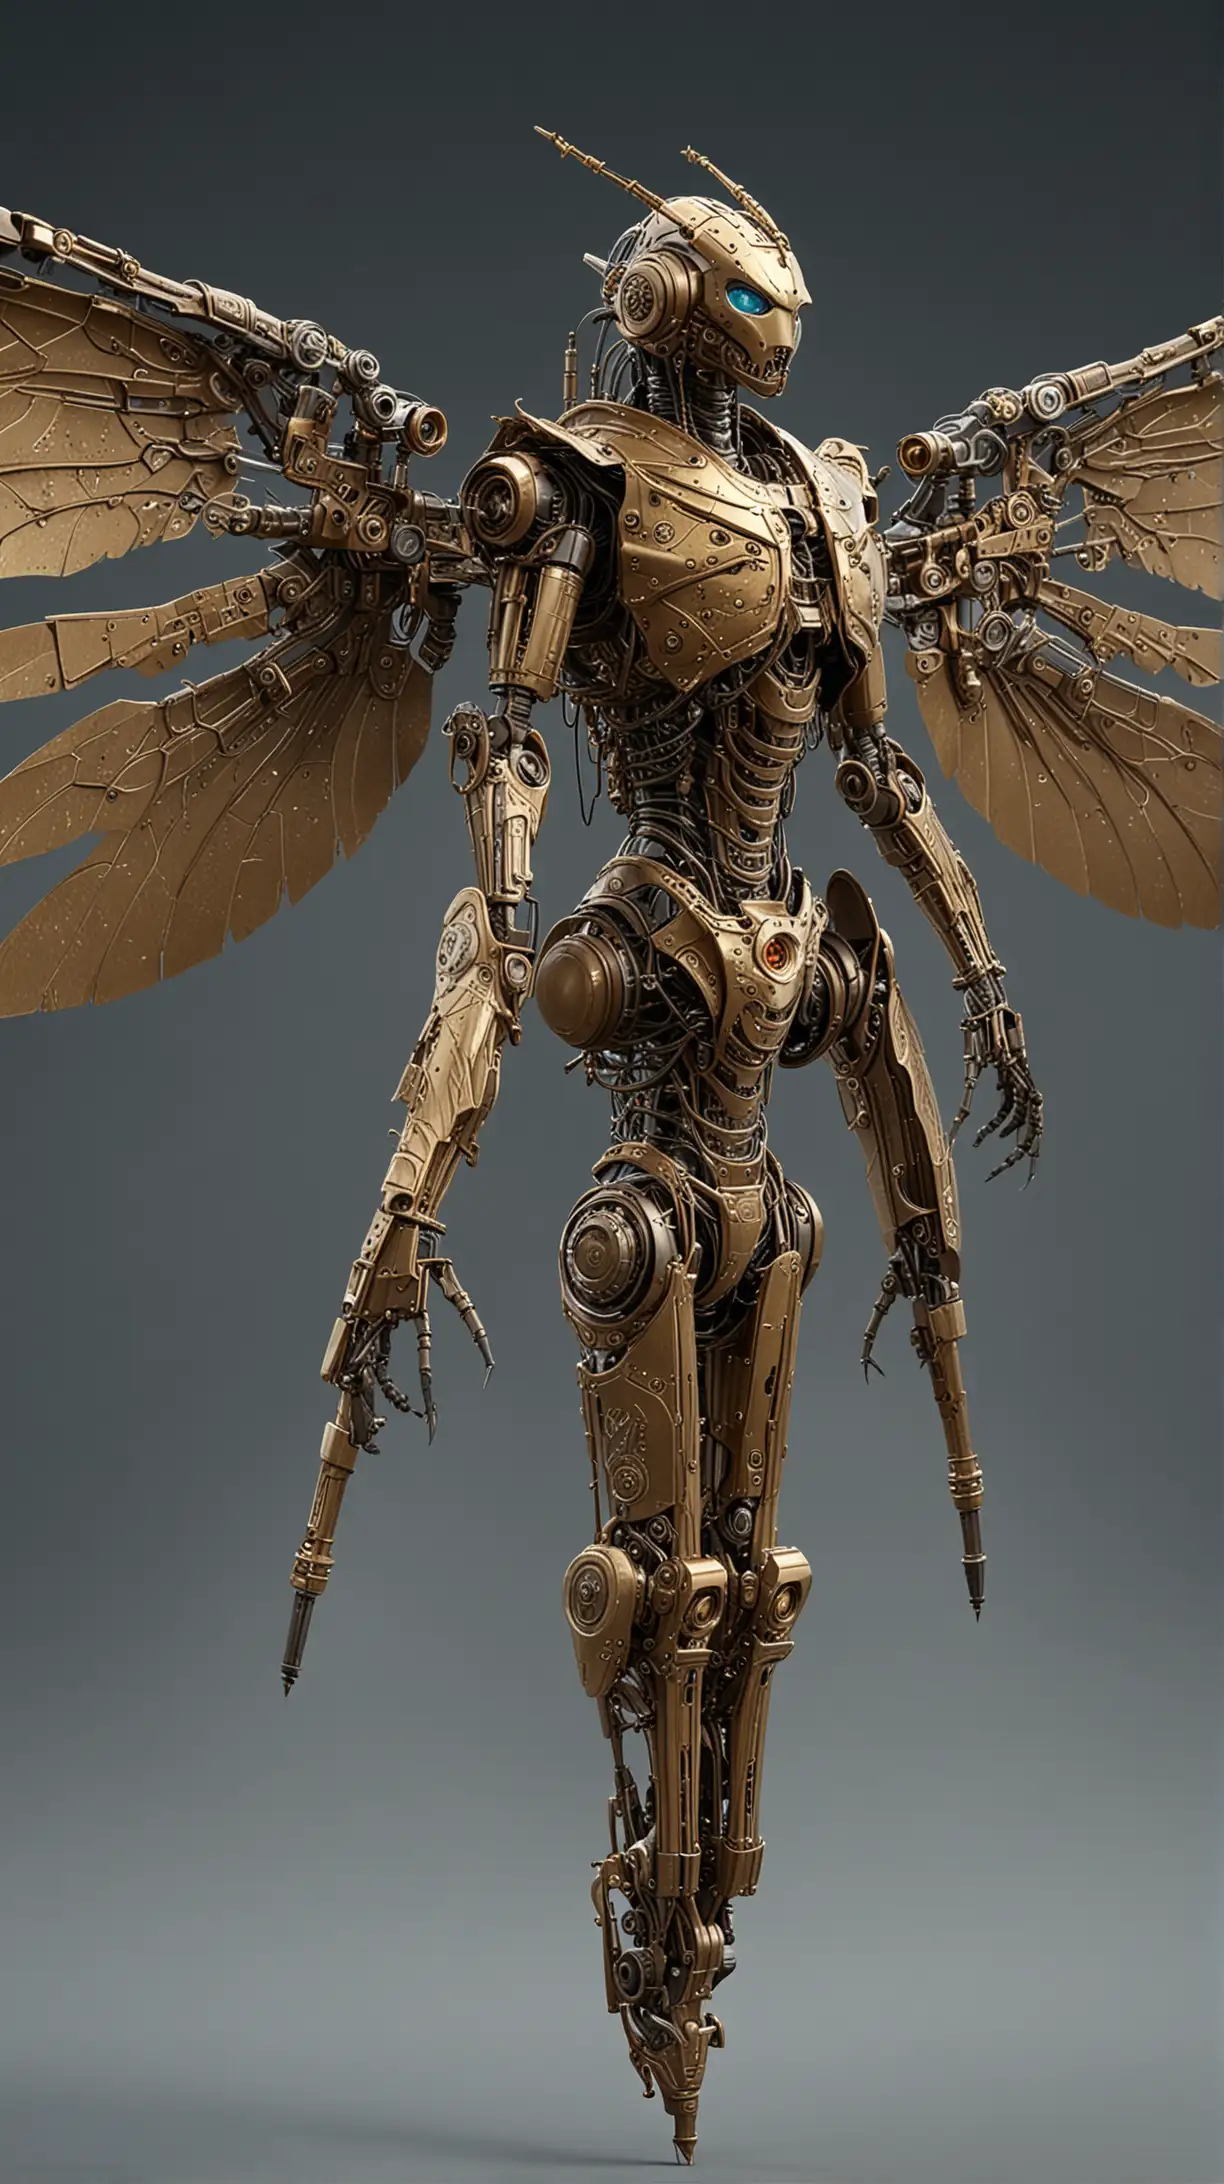 retrofuturistic, dragon fly, robot, giant sized, steampunk, brass metal components are exoskeleton, wings, flight mechanism, steam engine, control system, propulsion system, sensors, artificial muscles, communications system, and armor plating, Octane Rendering 3d, ornate, hyper realistic, intricate detailed